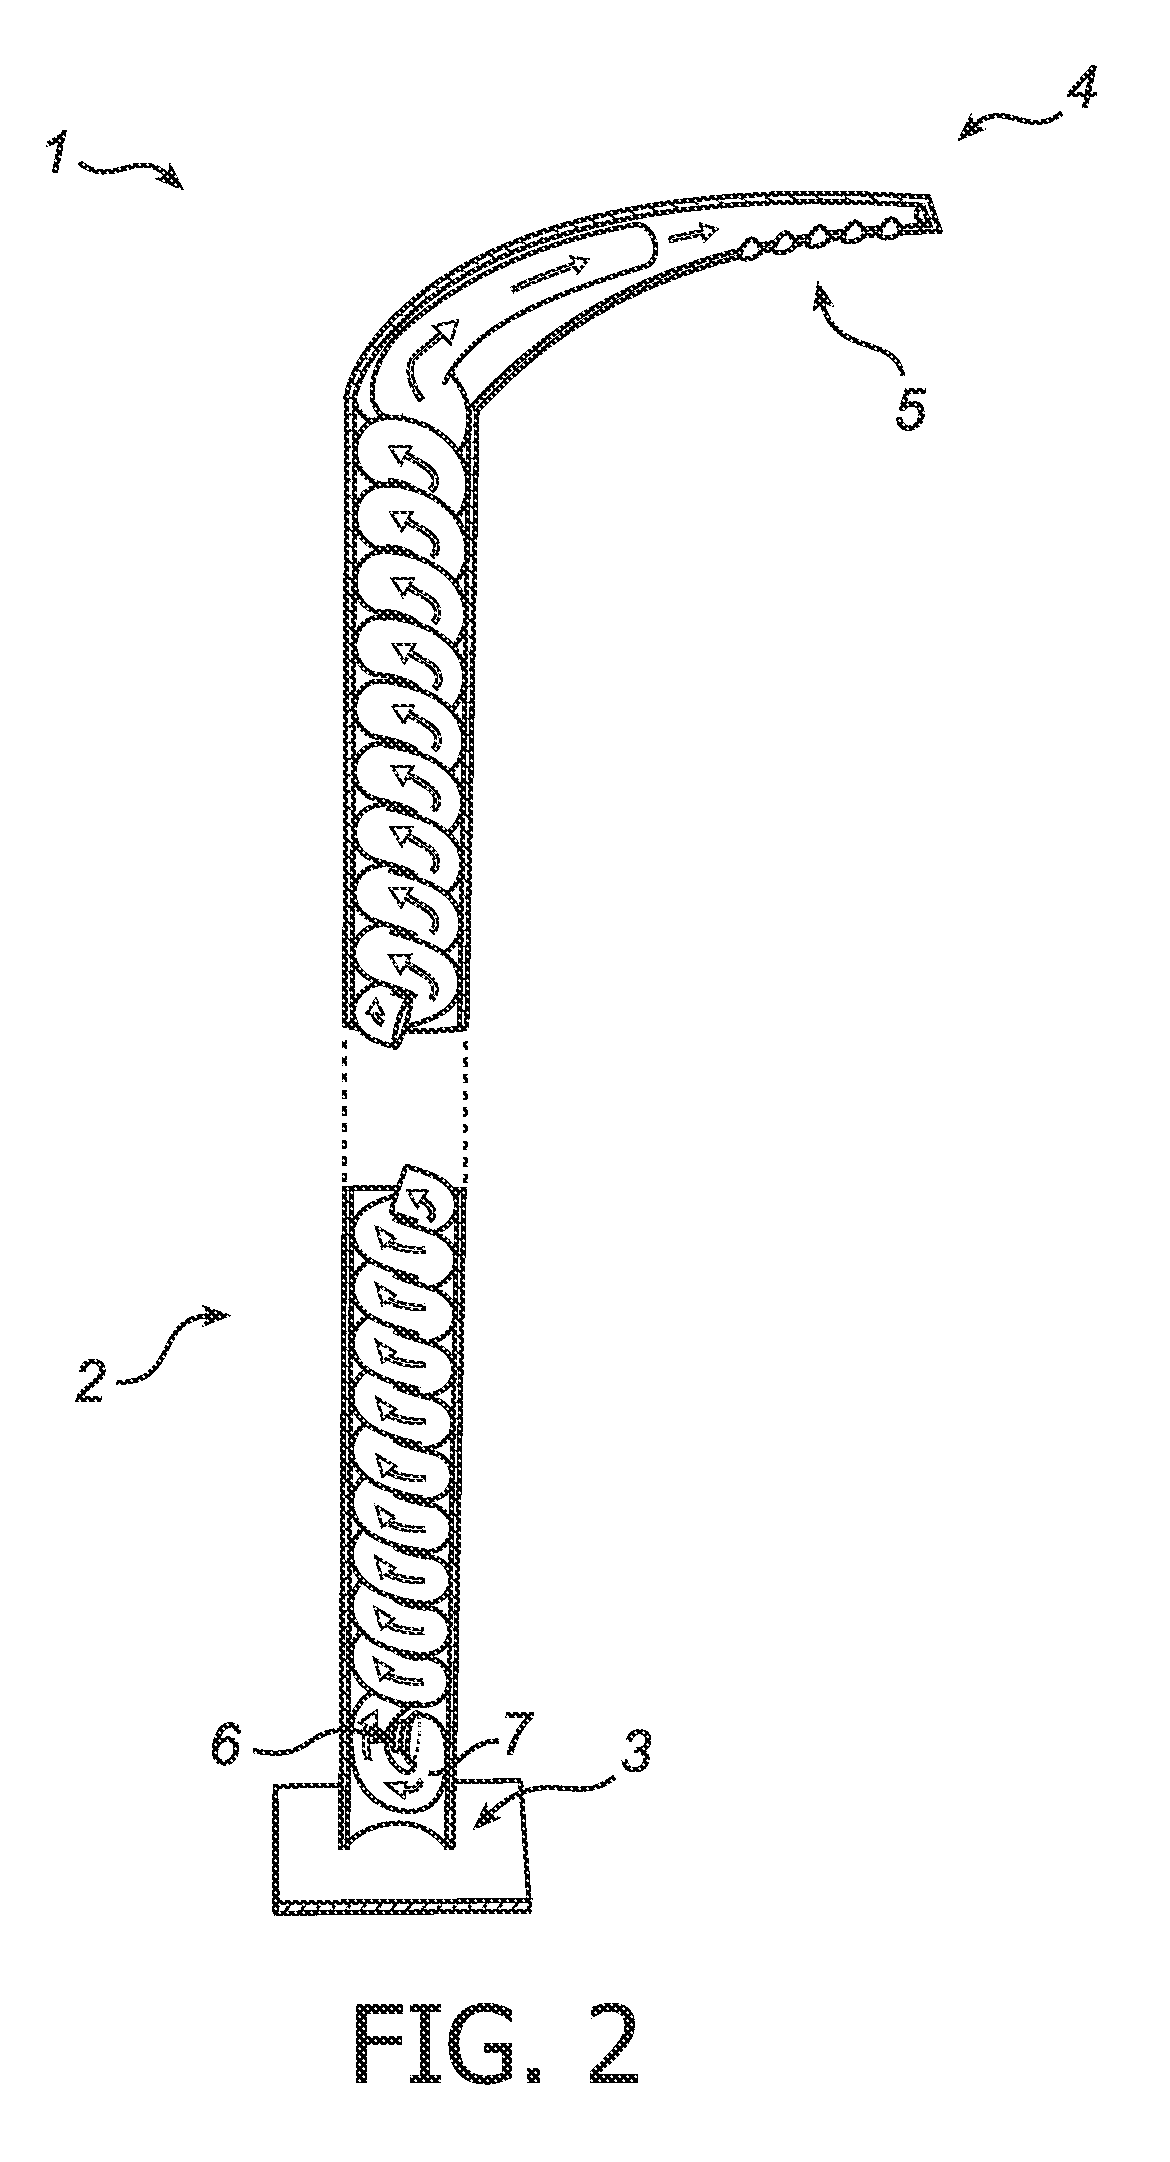 Lighting device with pulsating fluid cooling